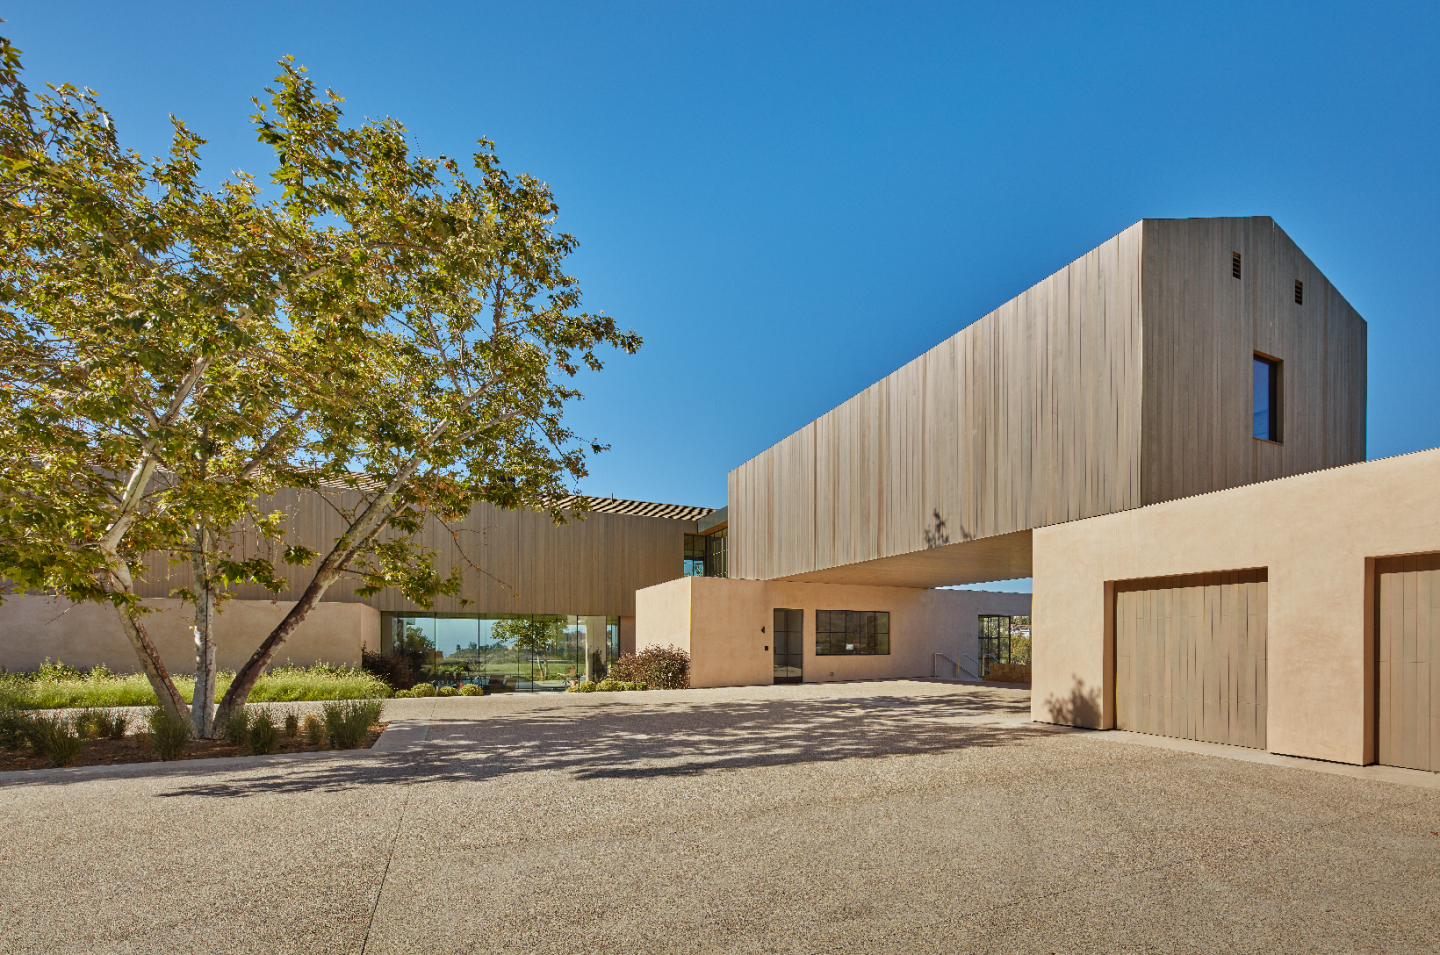 The modern mansion, built in 2021 by Noah Walker, holds 19,000-square-foot of spaces filled with glass, wood and stone.